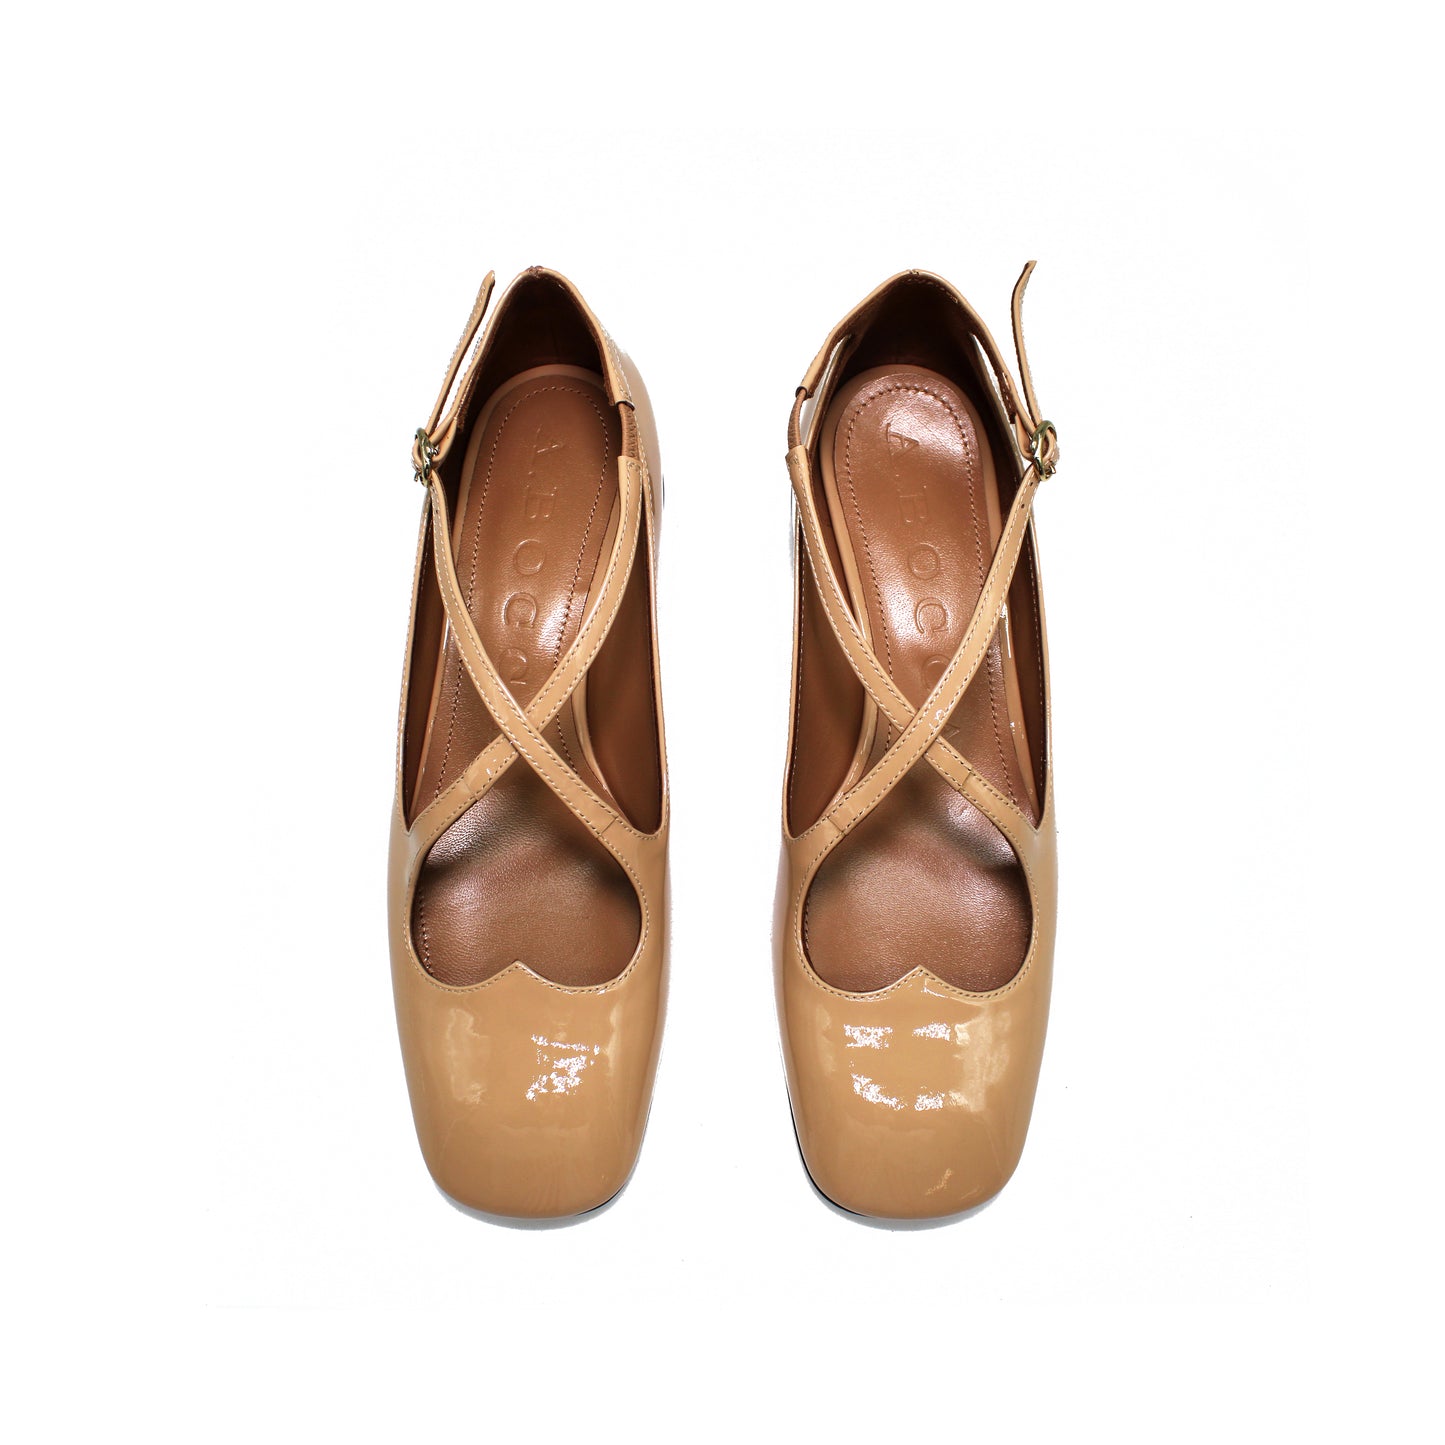 Two for Love in latte-coloured patent leather